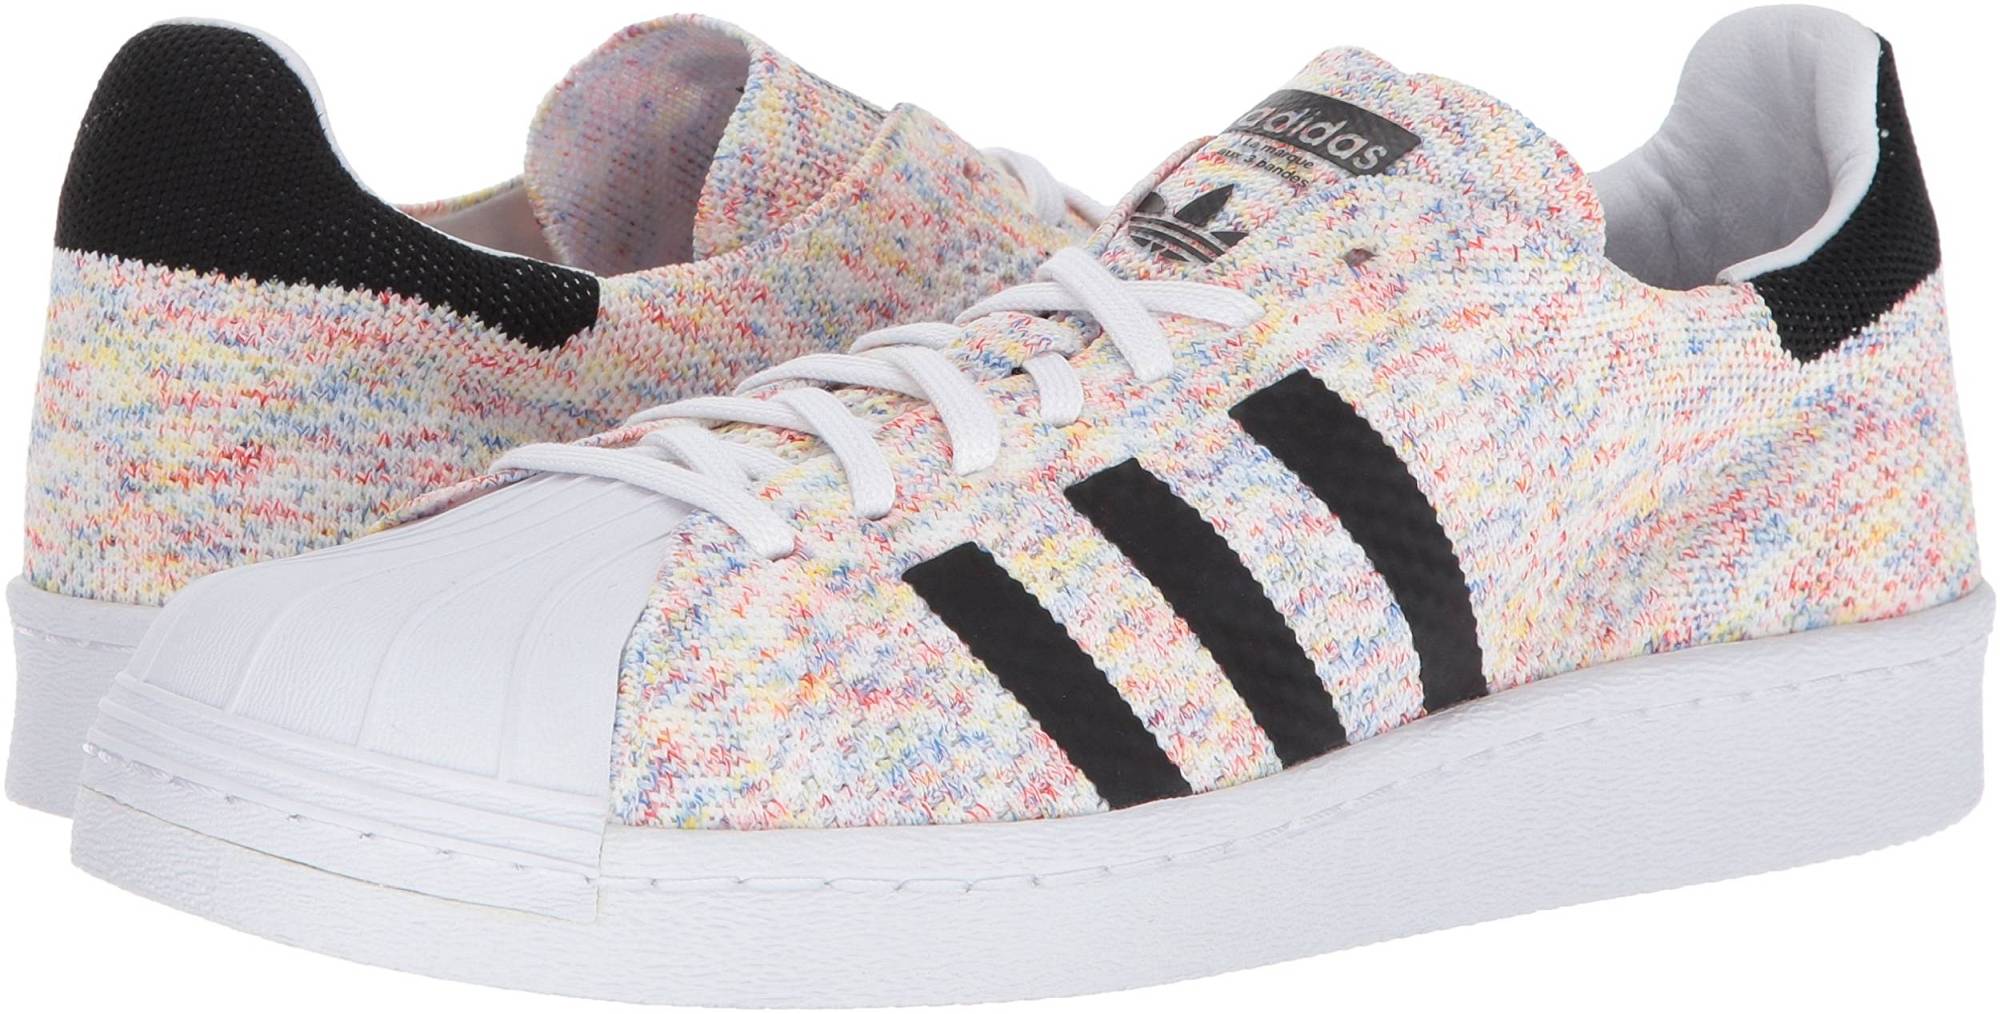 Adidas Superstar 80s Primeknit – Shoes Reviews & Reasons To Buy